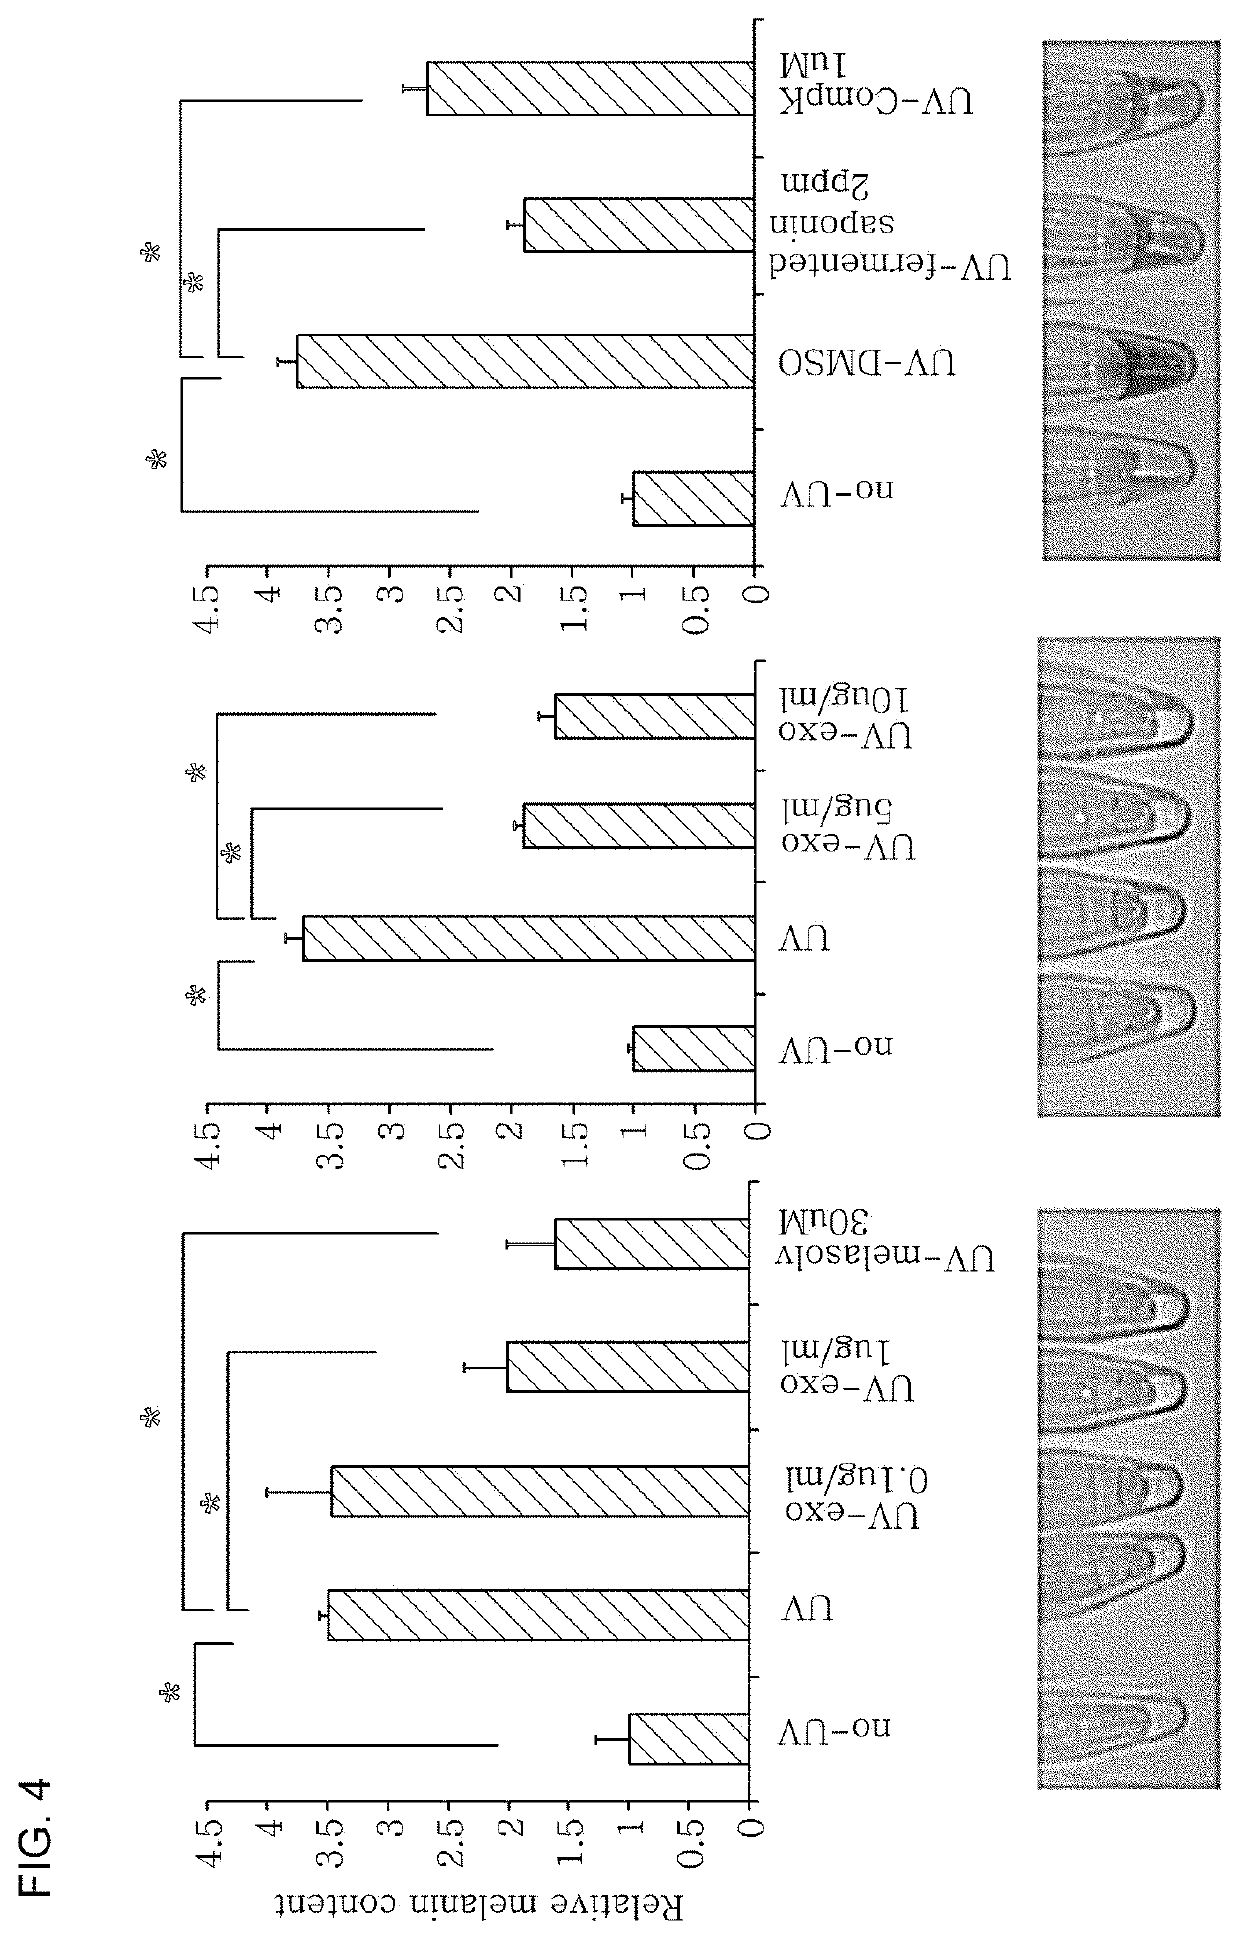 Lightening composition comprising ginseng-derived exosome-like vesicles